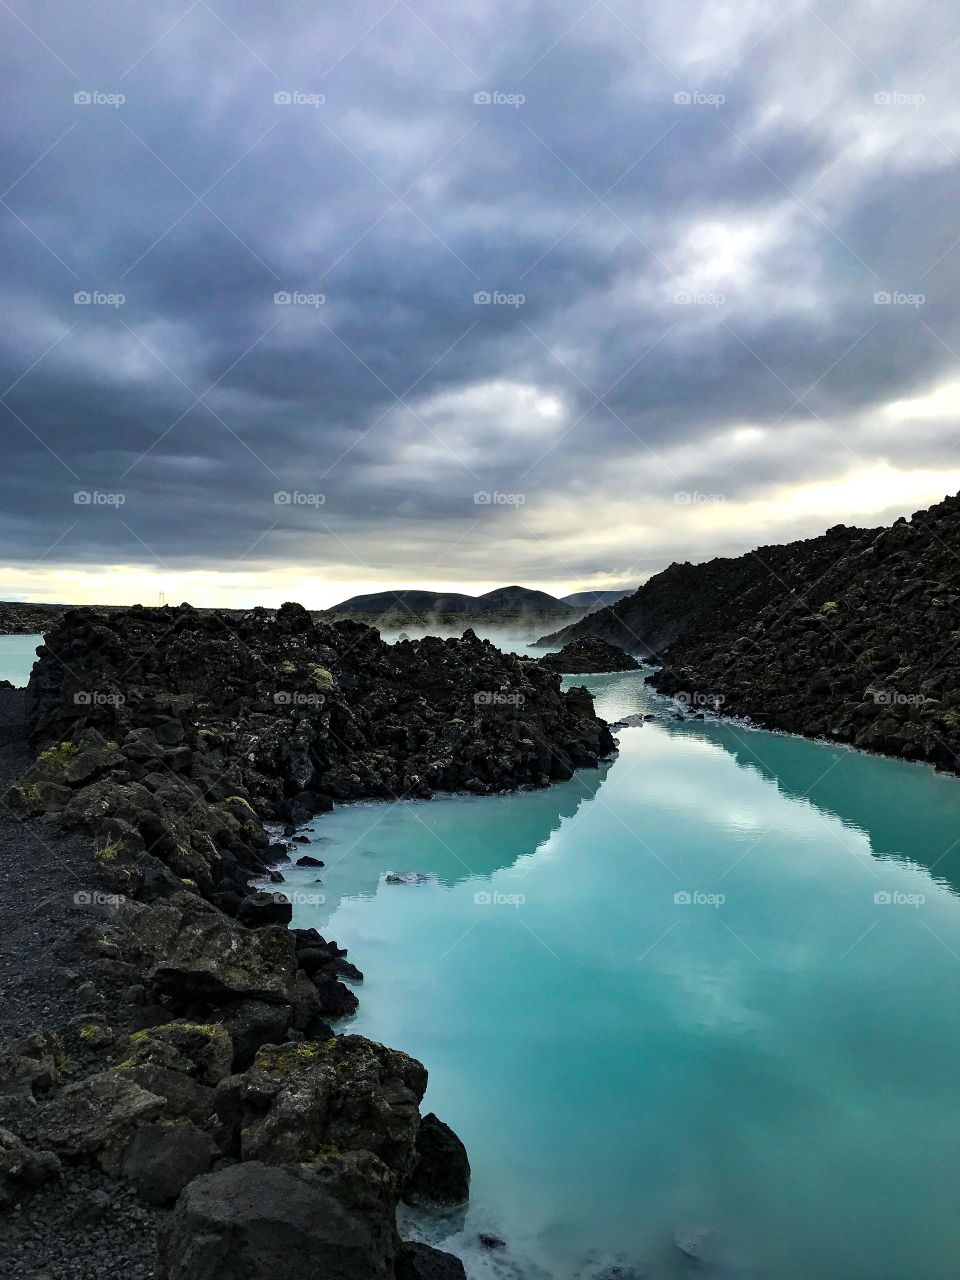 Blue Lagoon in Iceland, August 2018. 